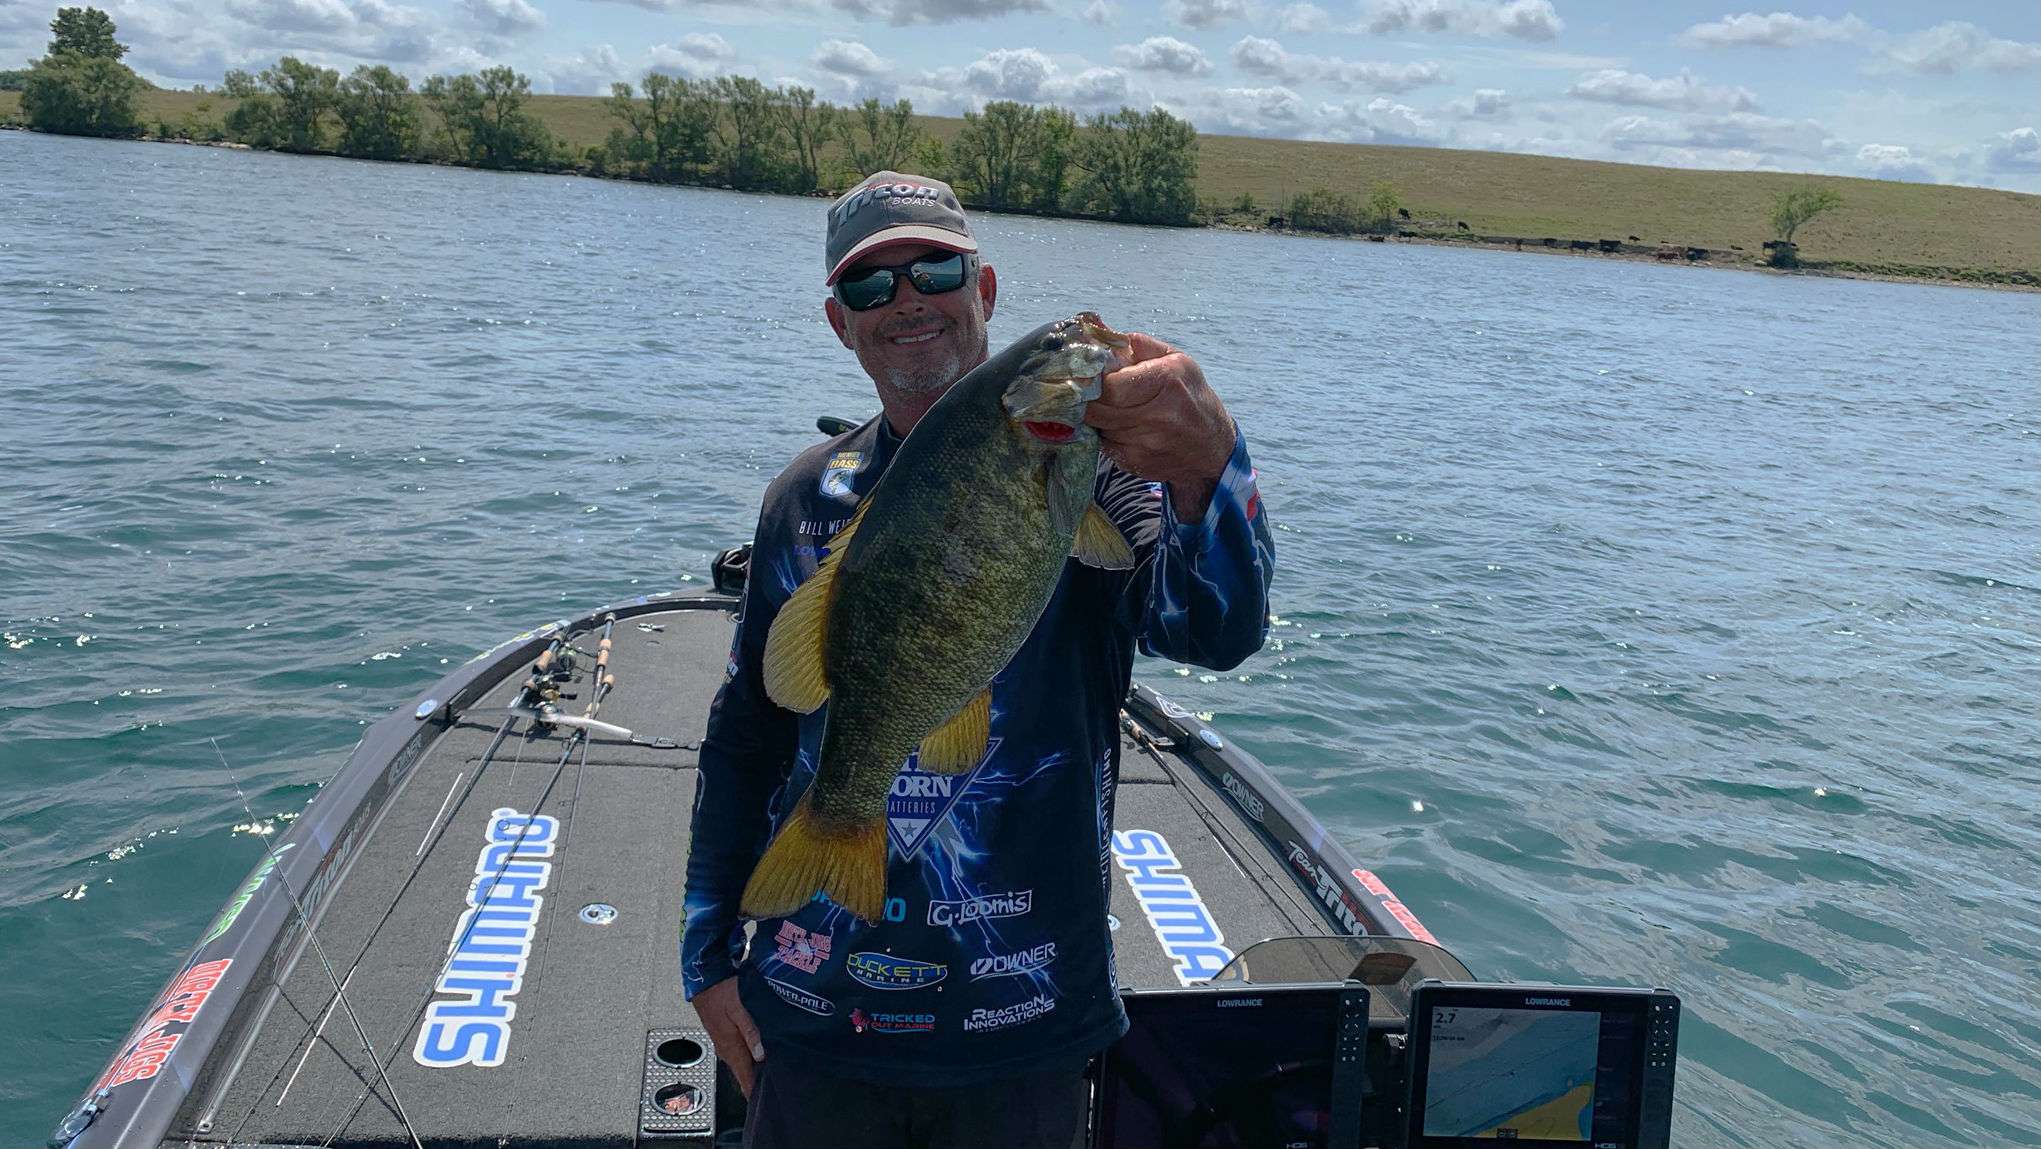 No. 3 for Bill Weidler is a 5-pounder smallie, Bill Weidler is all fired up!